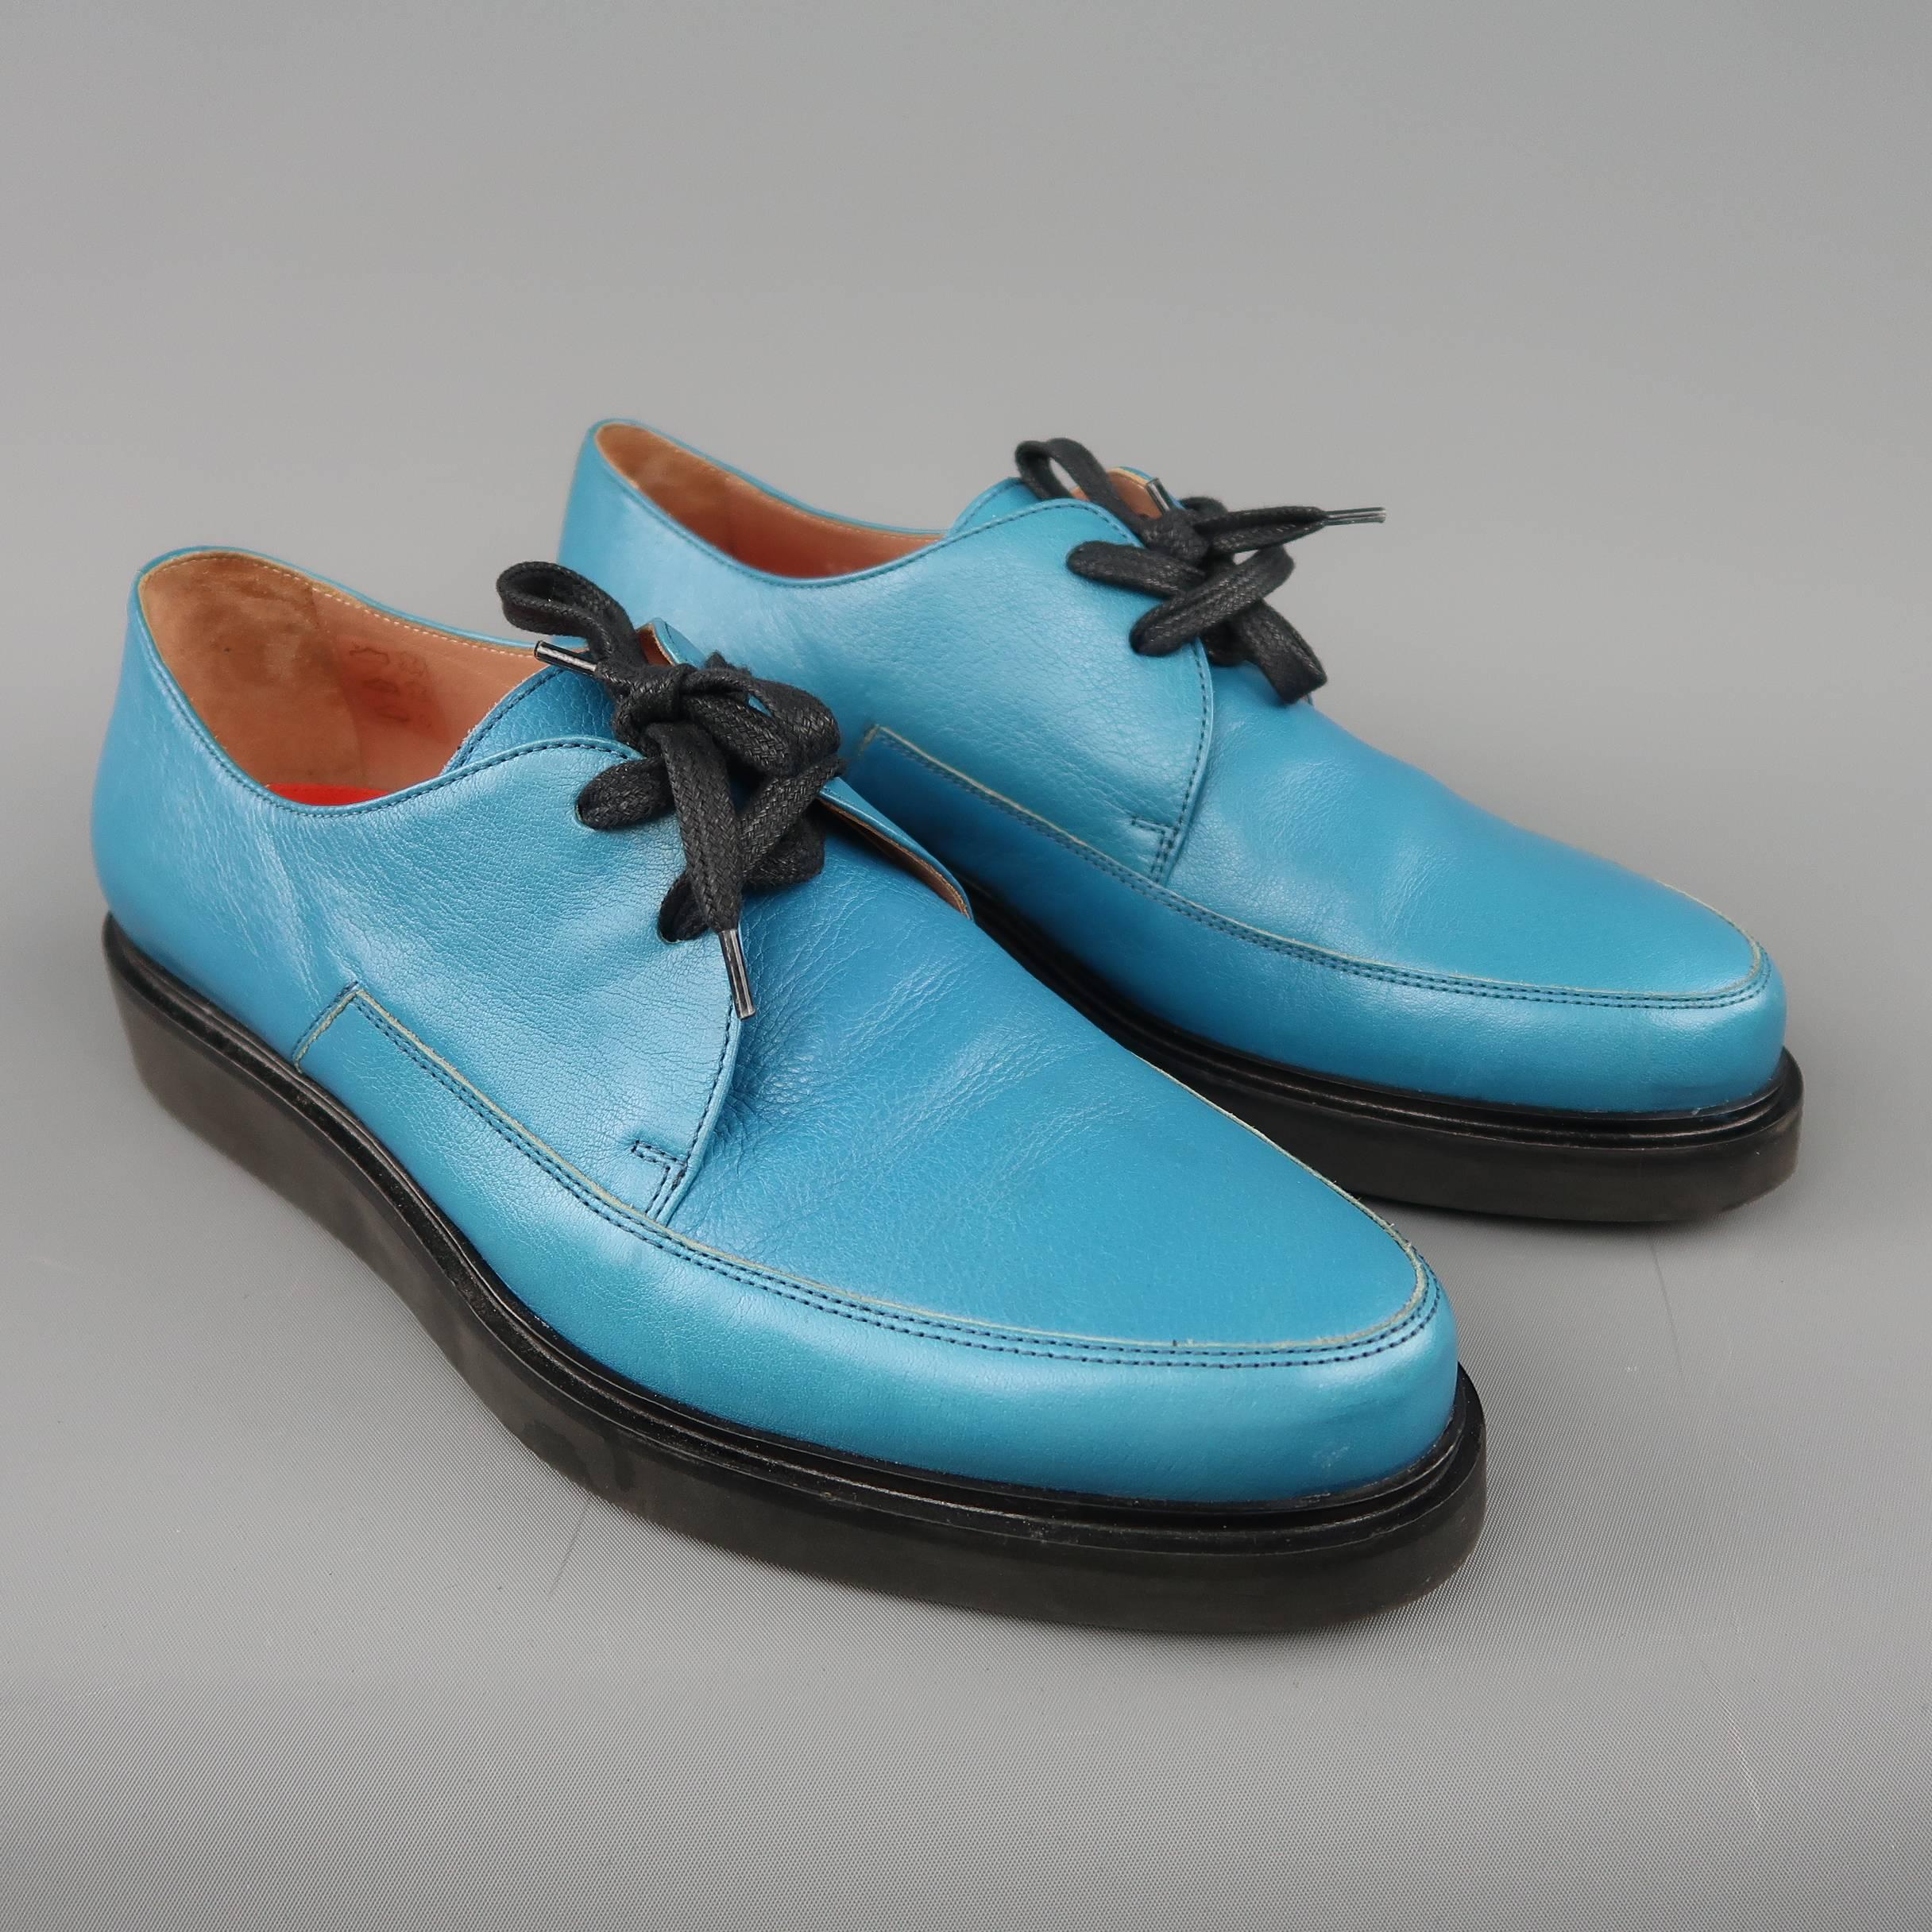 PAUL SMITH creepers come in turquoise leather with a pointed apron toe and thick black rubber sole. Made in Italy.
 
Good Pre-Owned Condition.
Marked: IT 41
 
Outsole: 11.5 x 4.25 in.